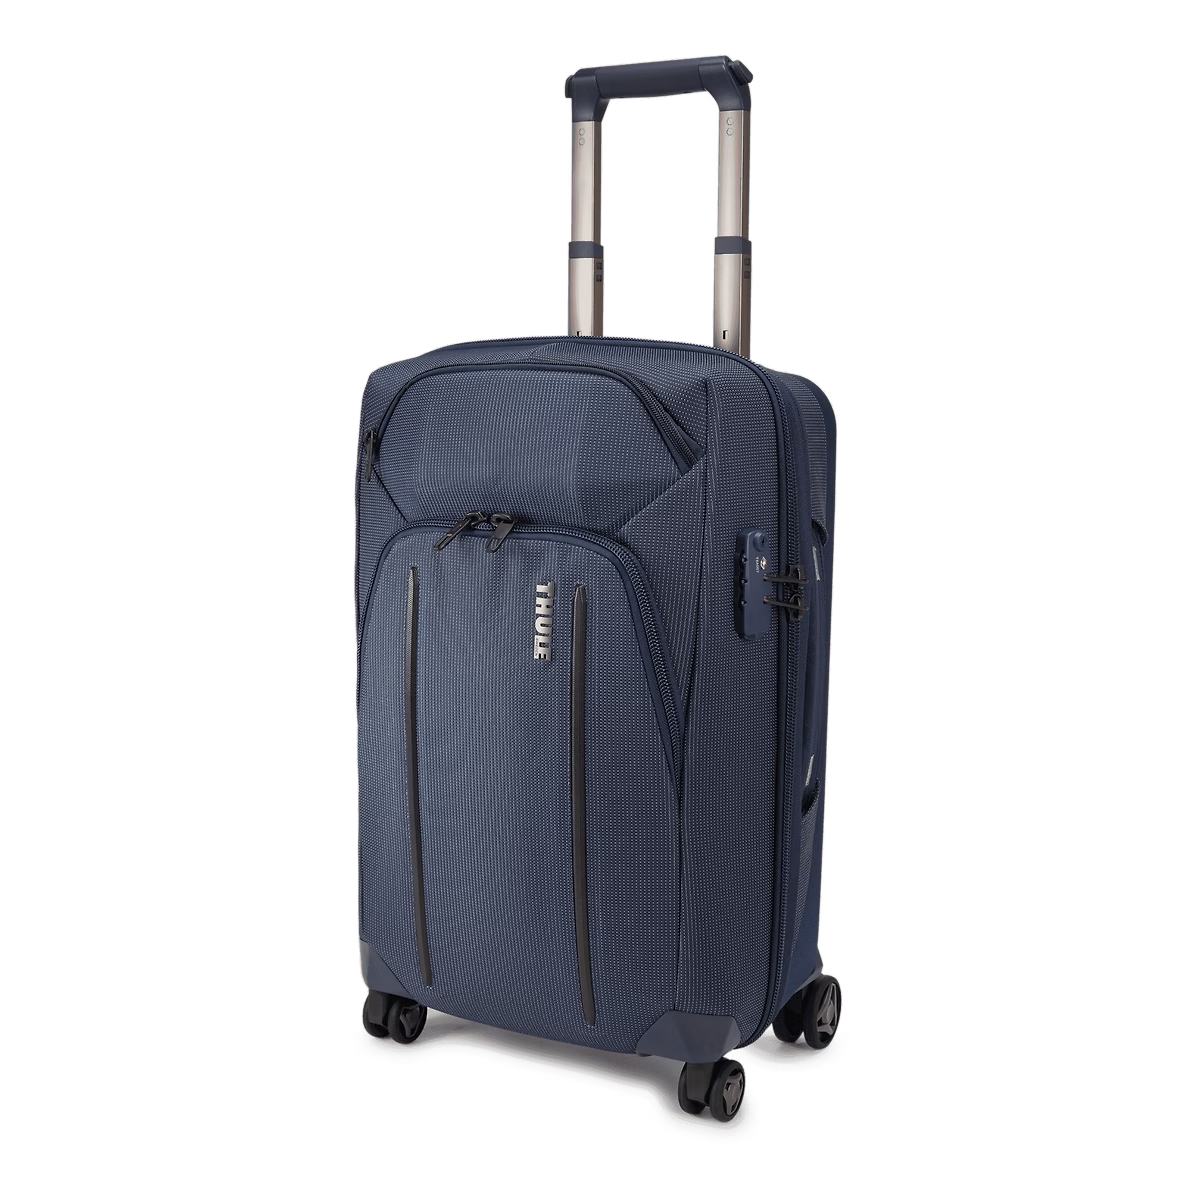 THULE Crossover 2 Carry On Spinner DRESS BLUE